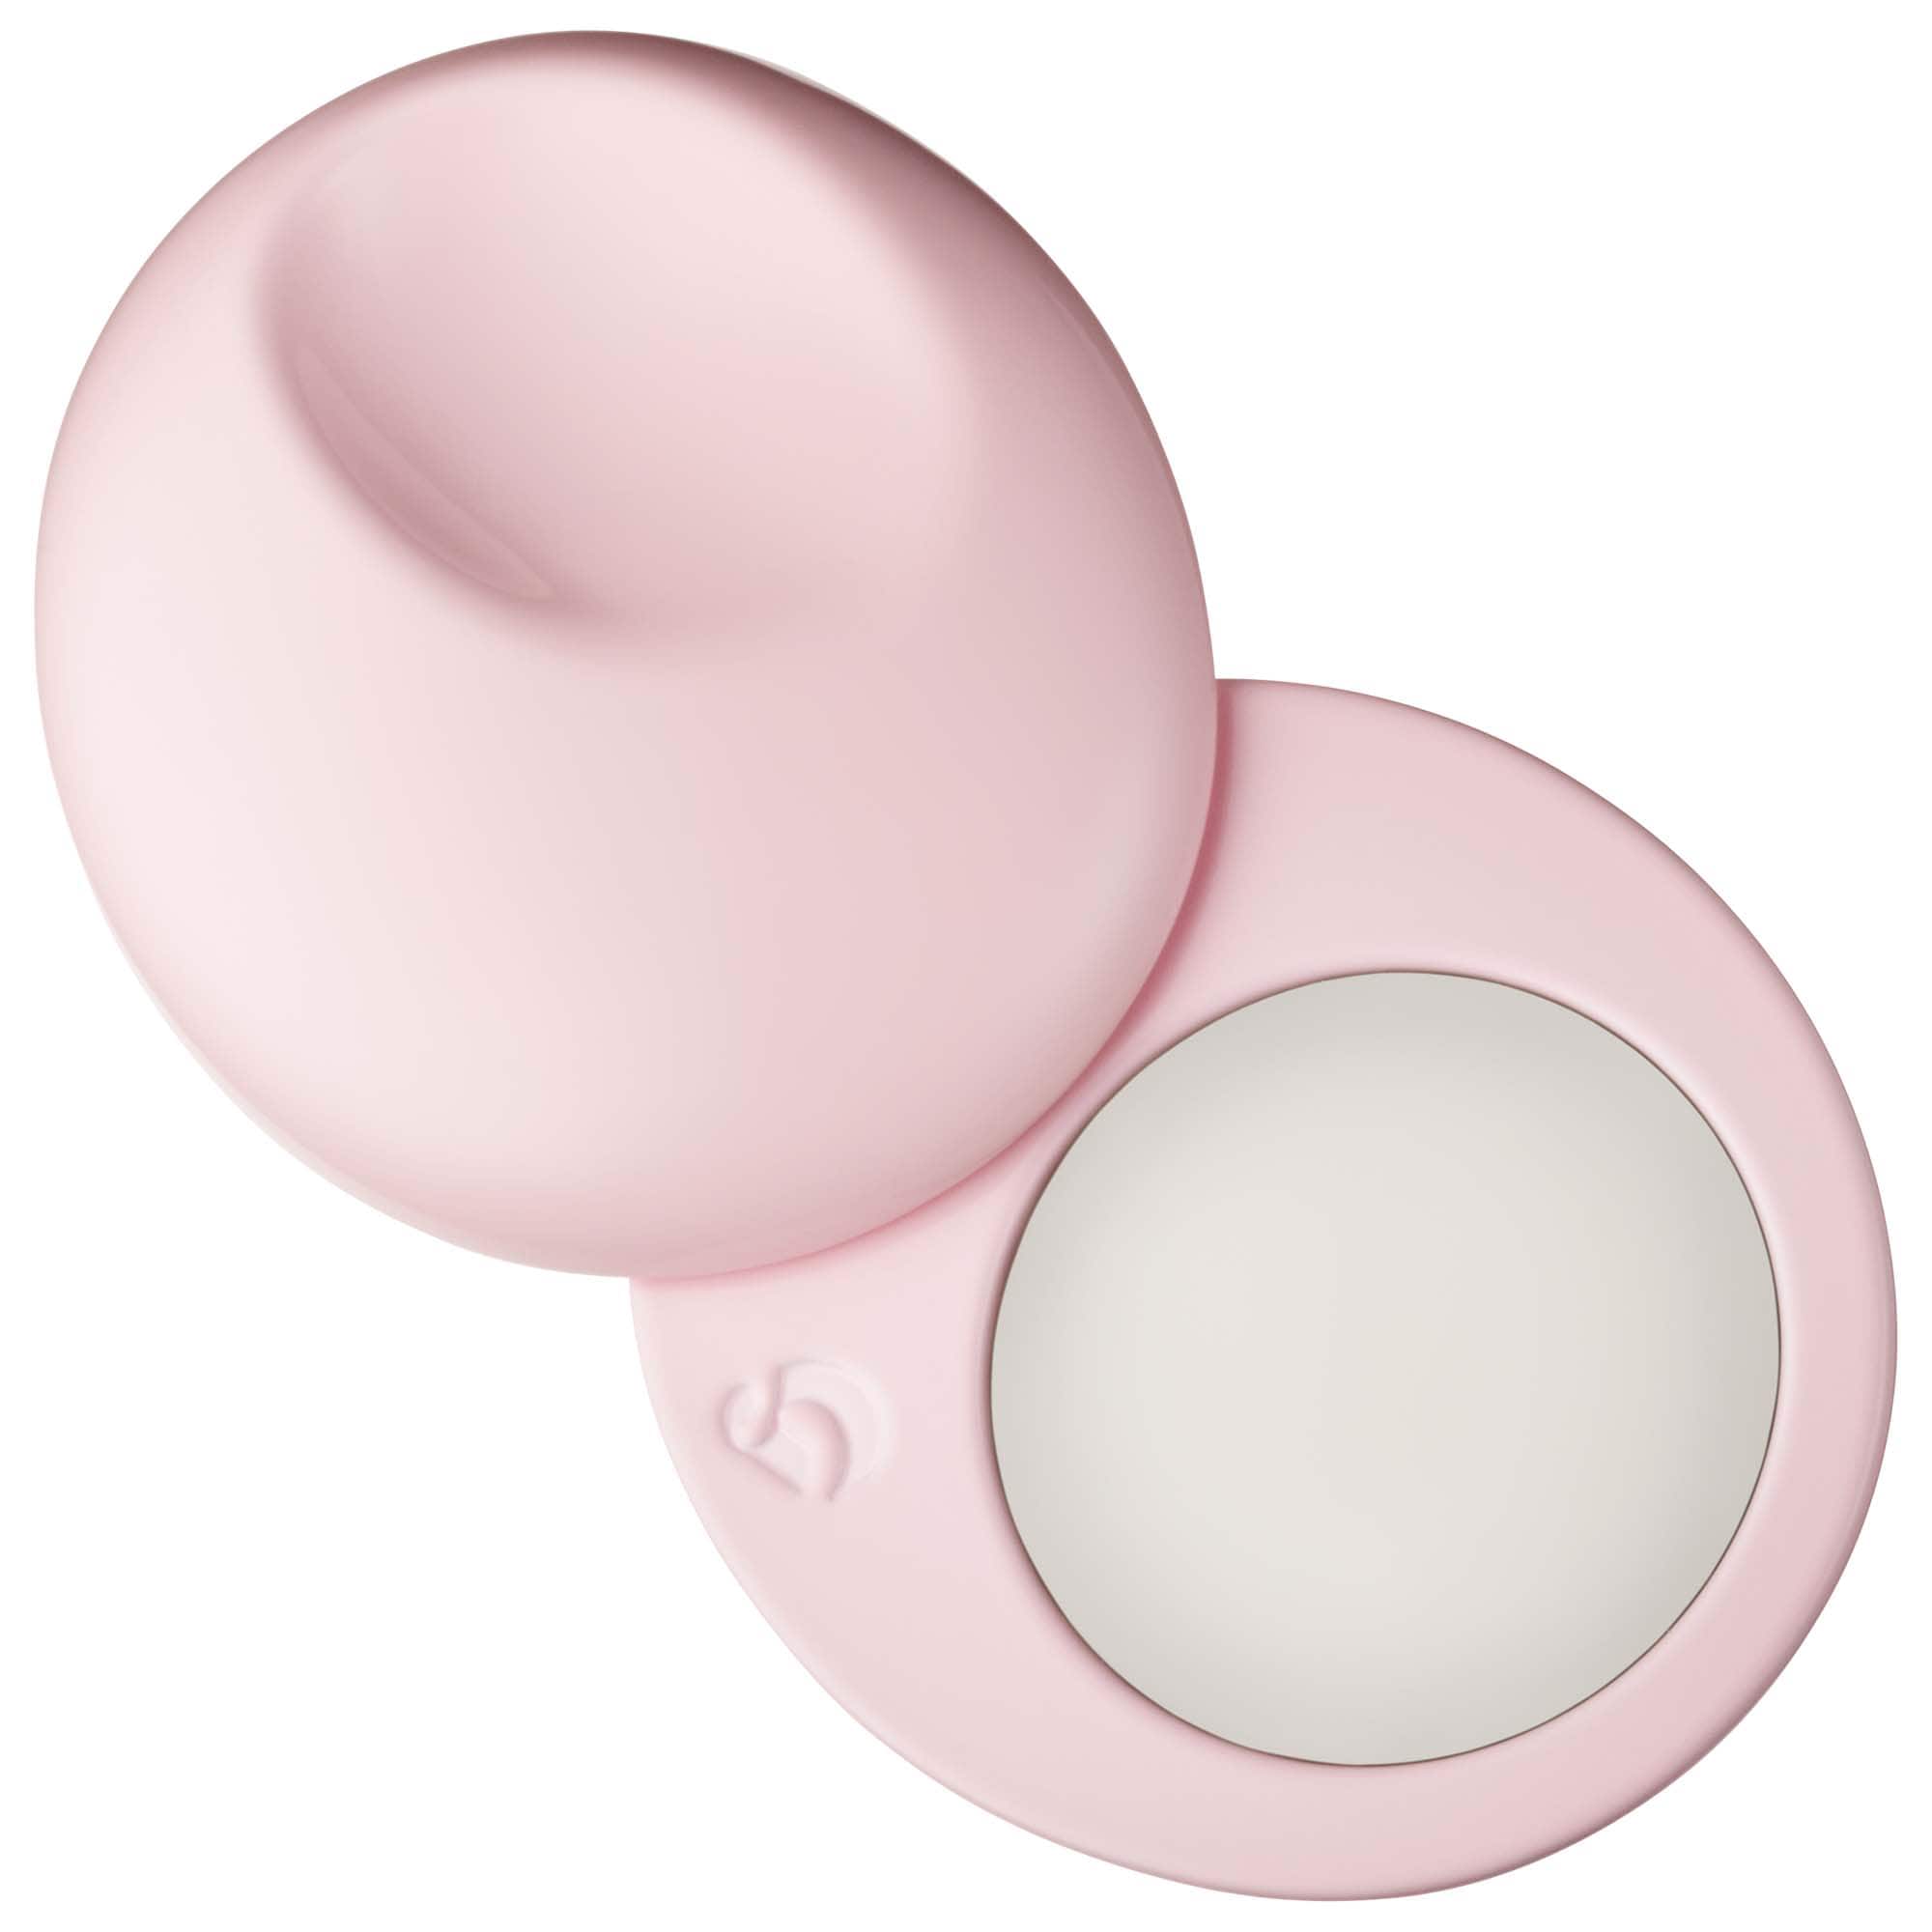 Glossier You Solid Perfume Glossier